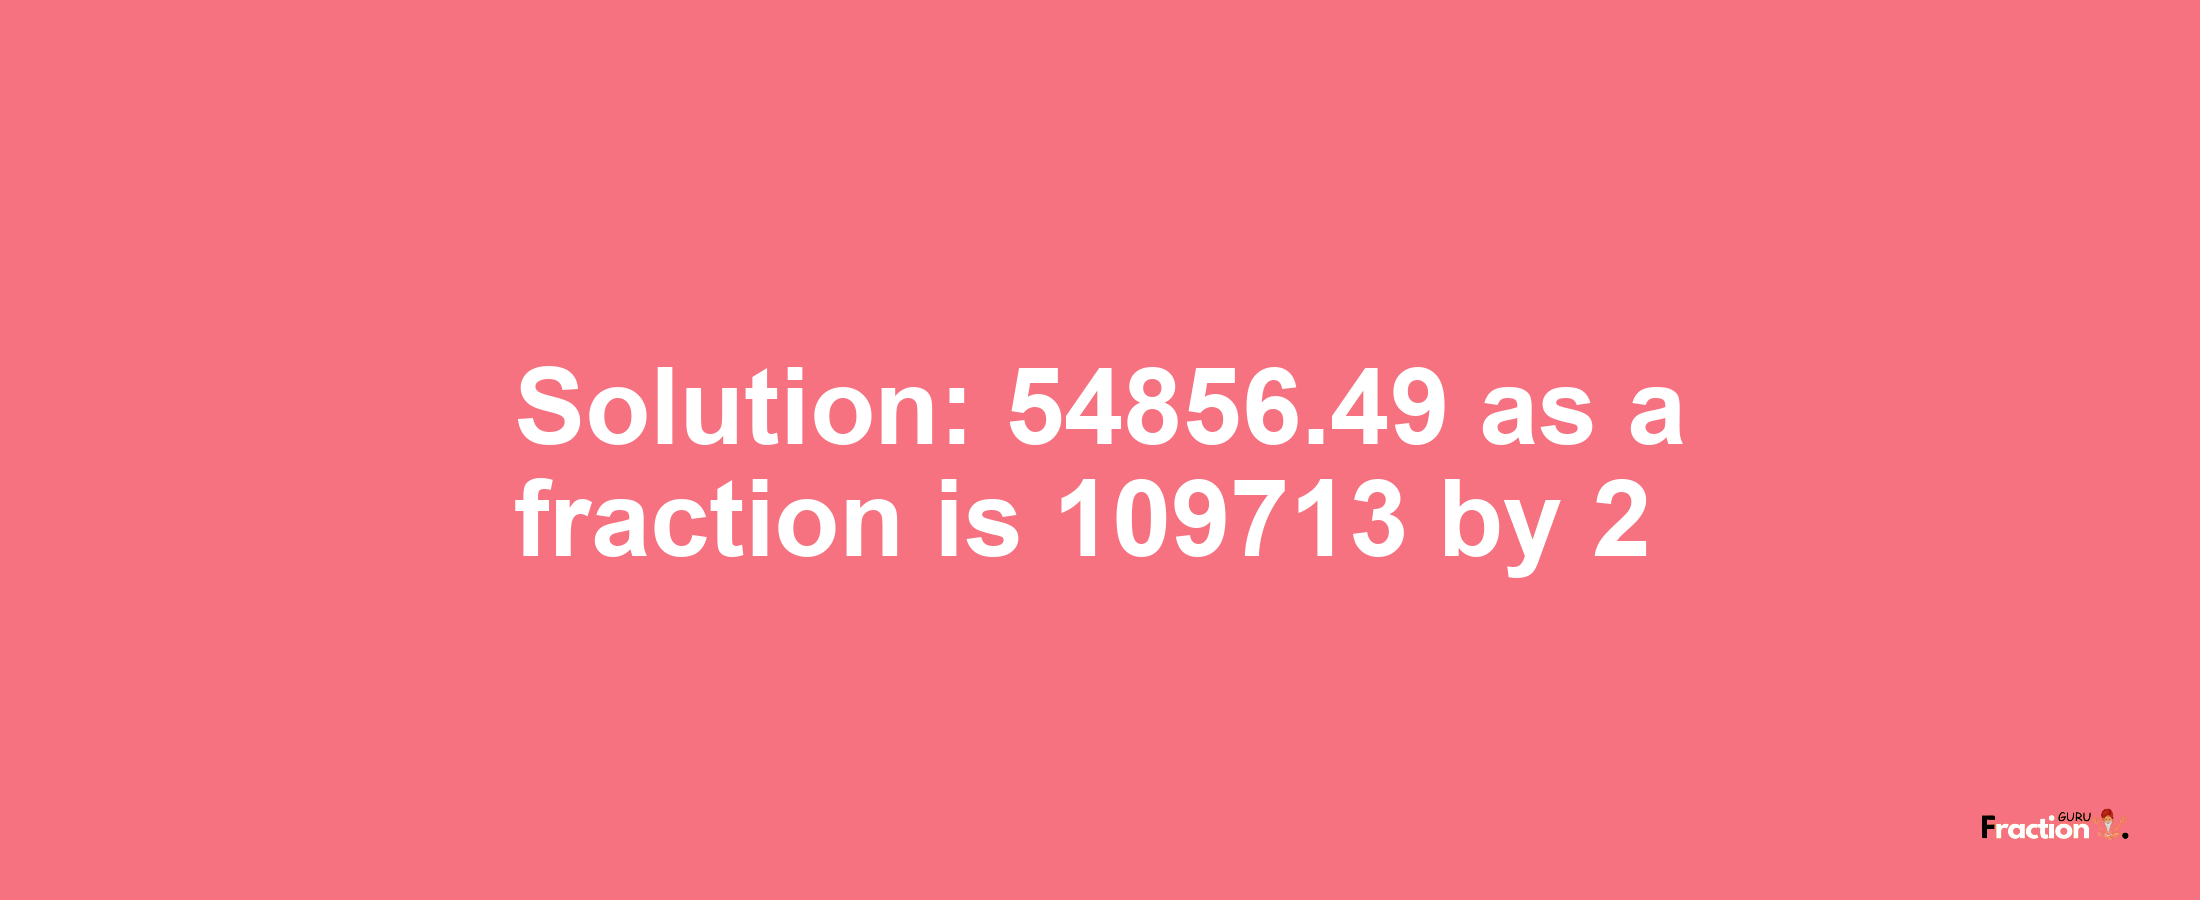 Solution:54856.49 as a fraction is 109713/2